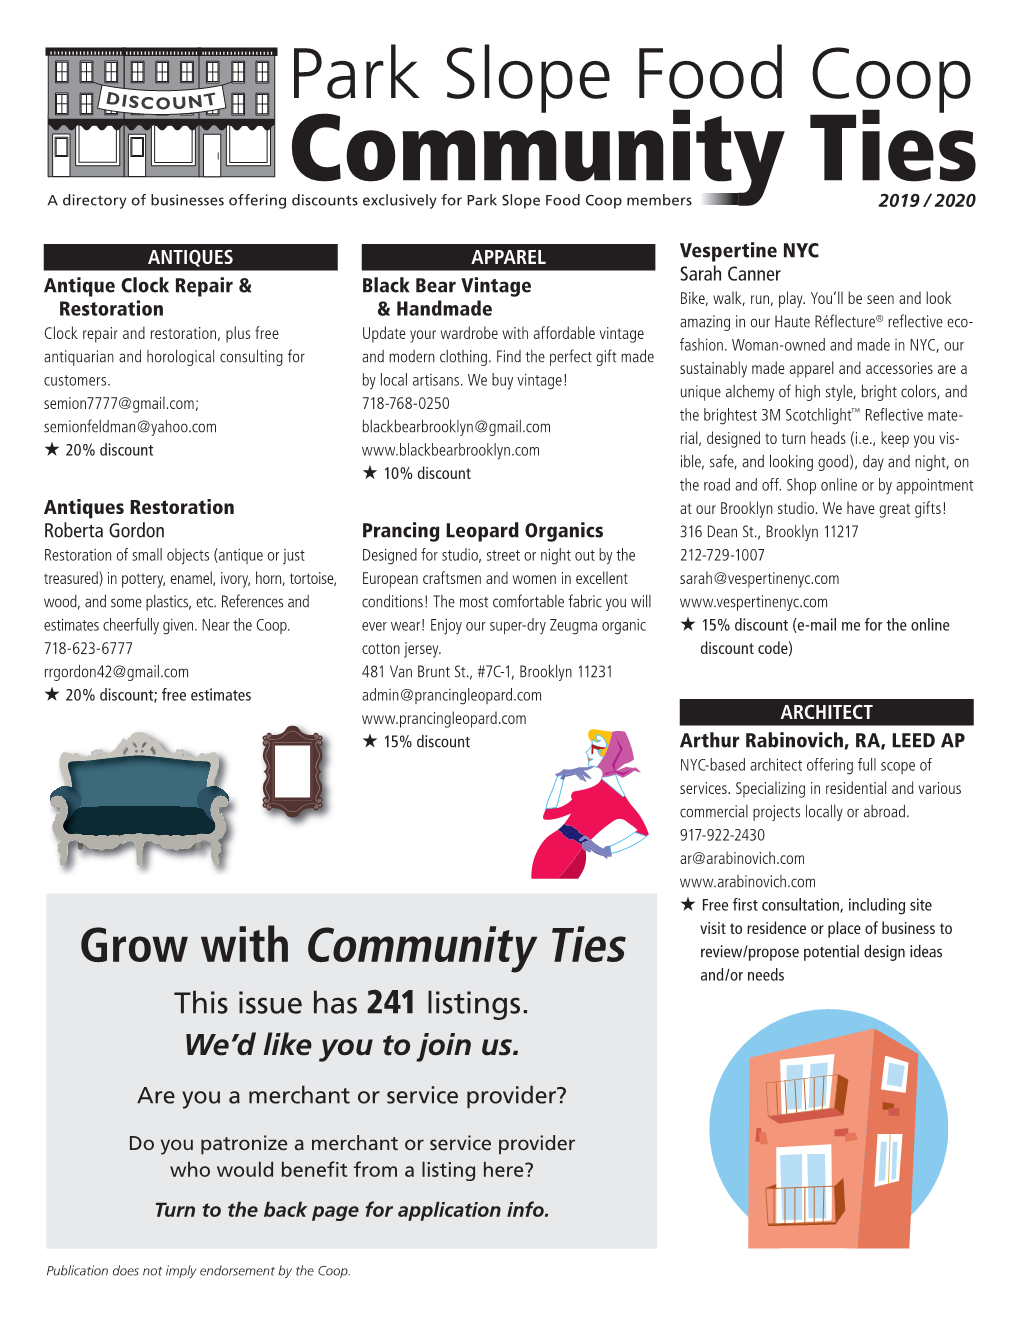 Community Ties Review/Propose Potential Design Ideas And/Or Needs This Issue Has 241 Listings